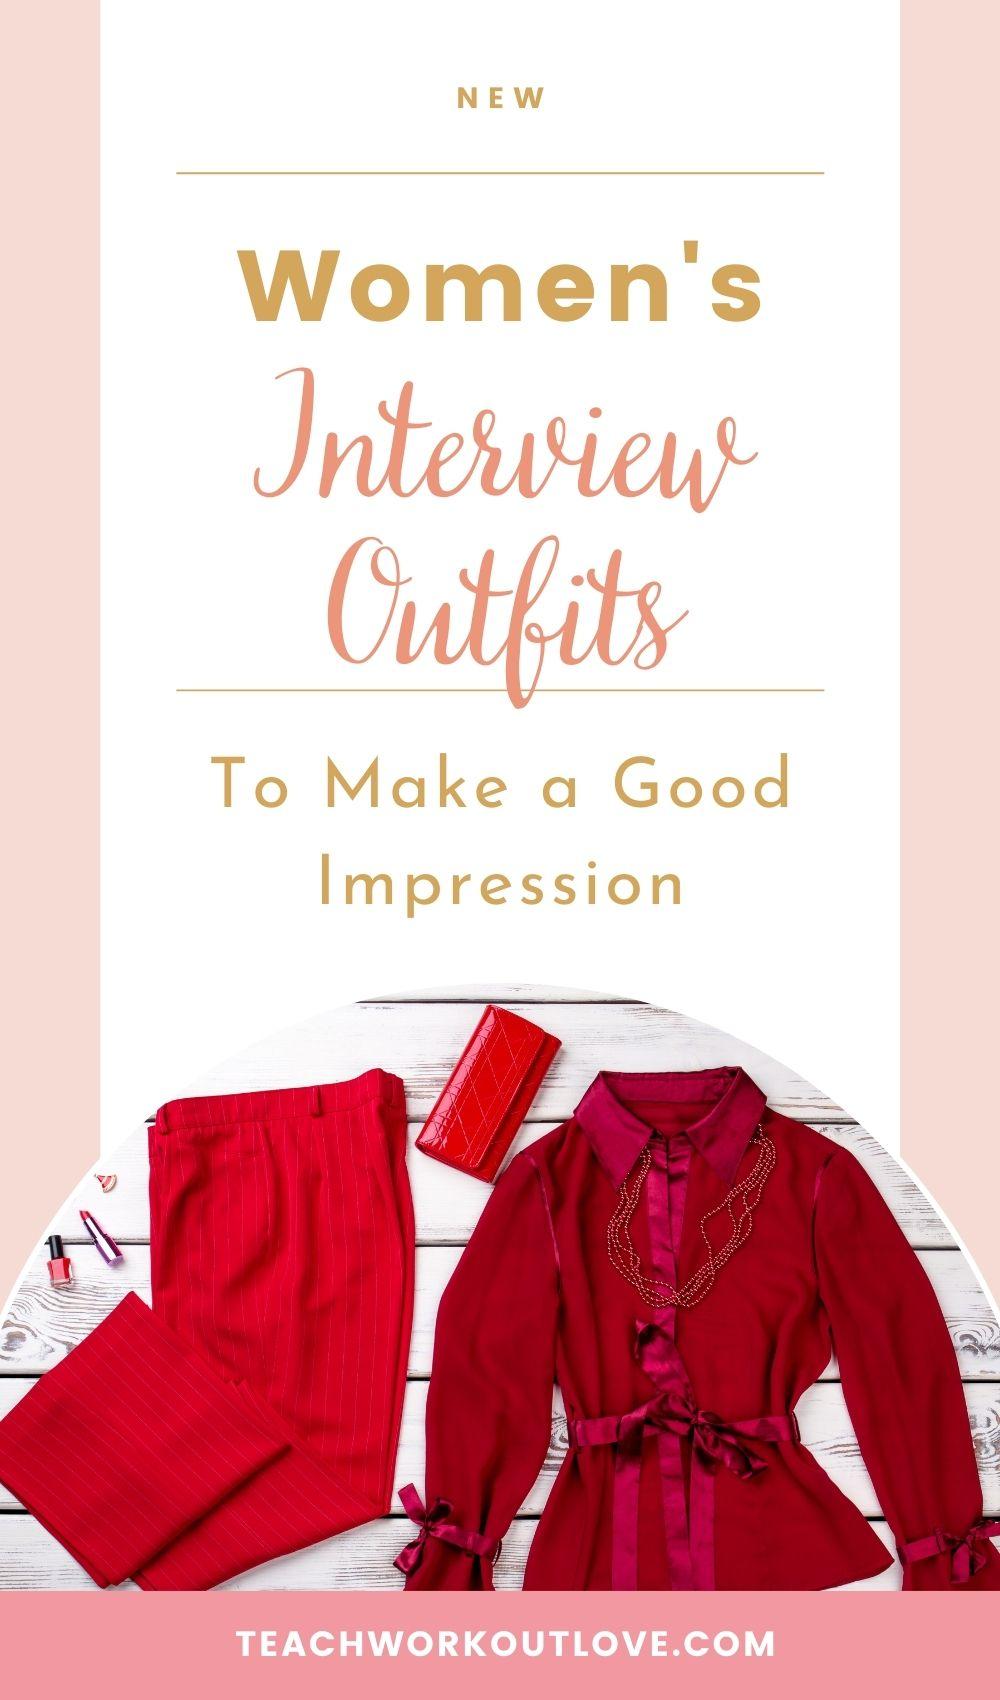 A professional woman knows how to the women's interview outfits. In this article, we focus on looking your best during the process, so you can make a memorable impression.